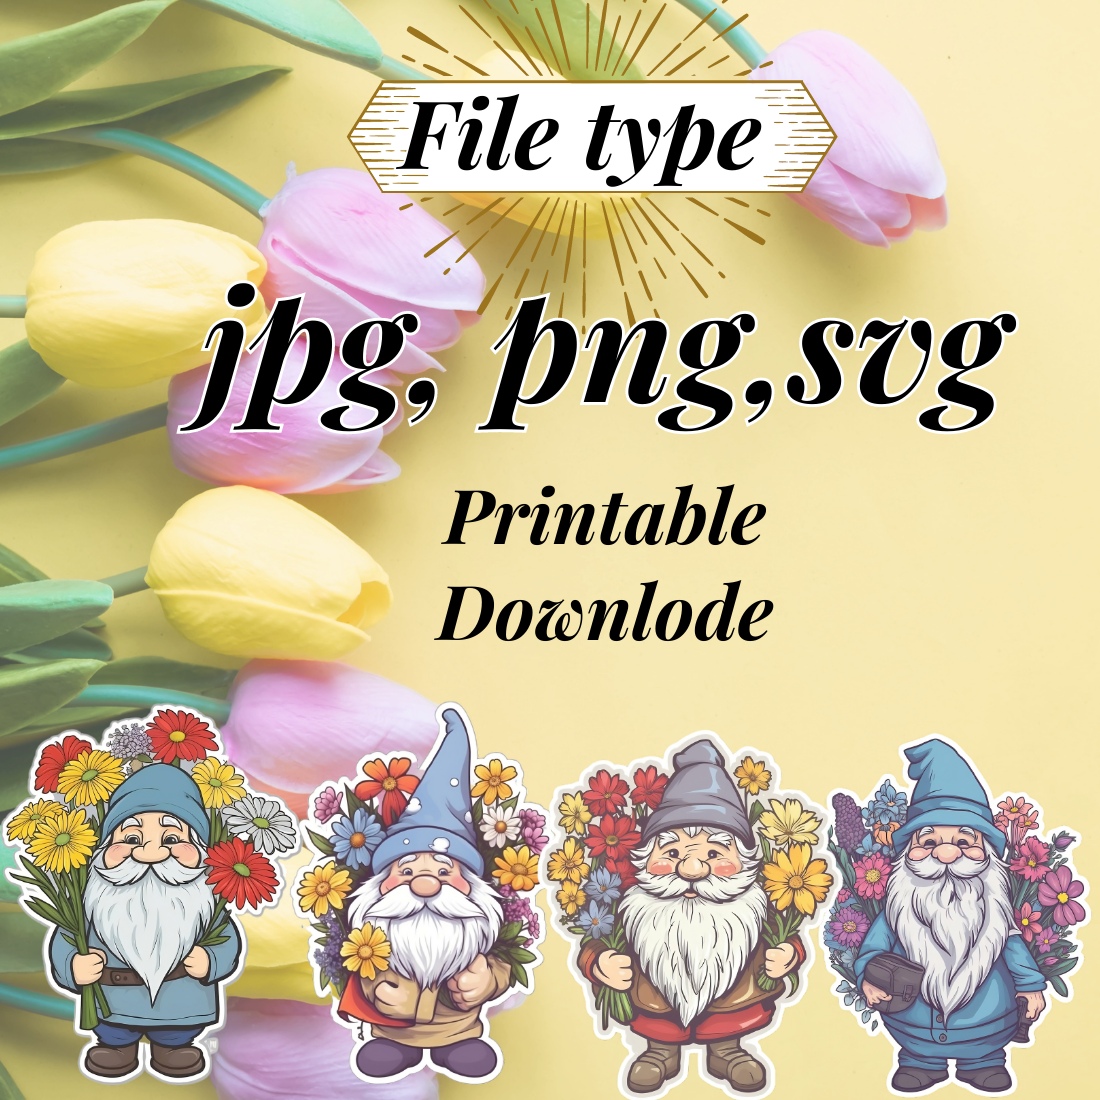 "Springtime Delight: An Illustrated Gnome Holding a Bouquet Sticker" preview image.